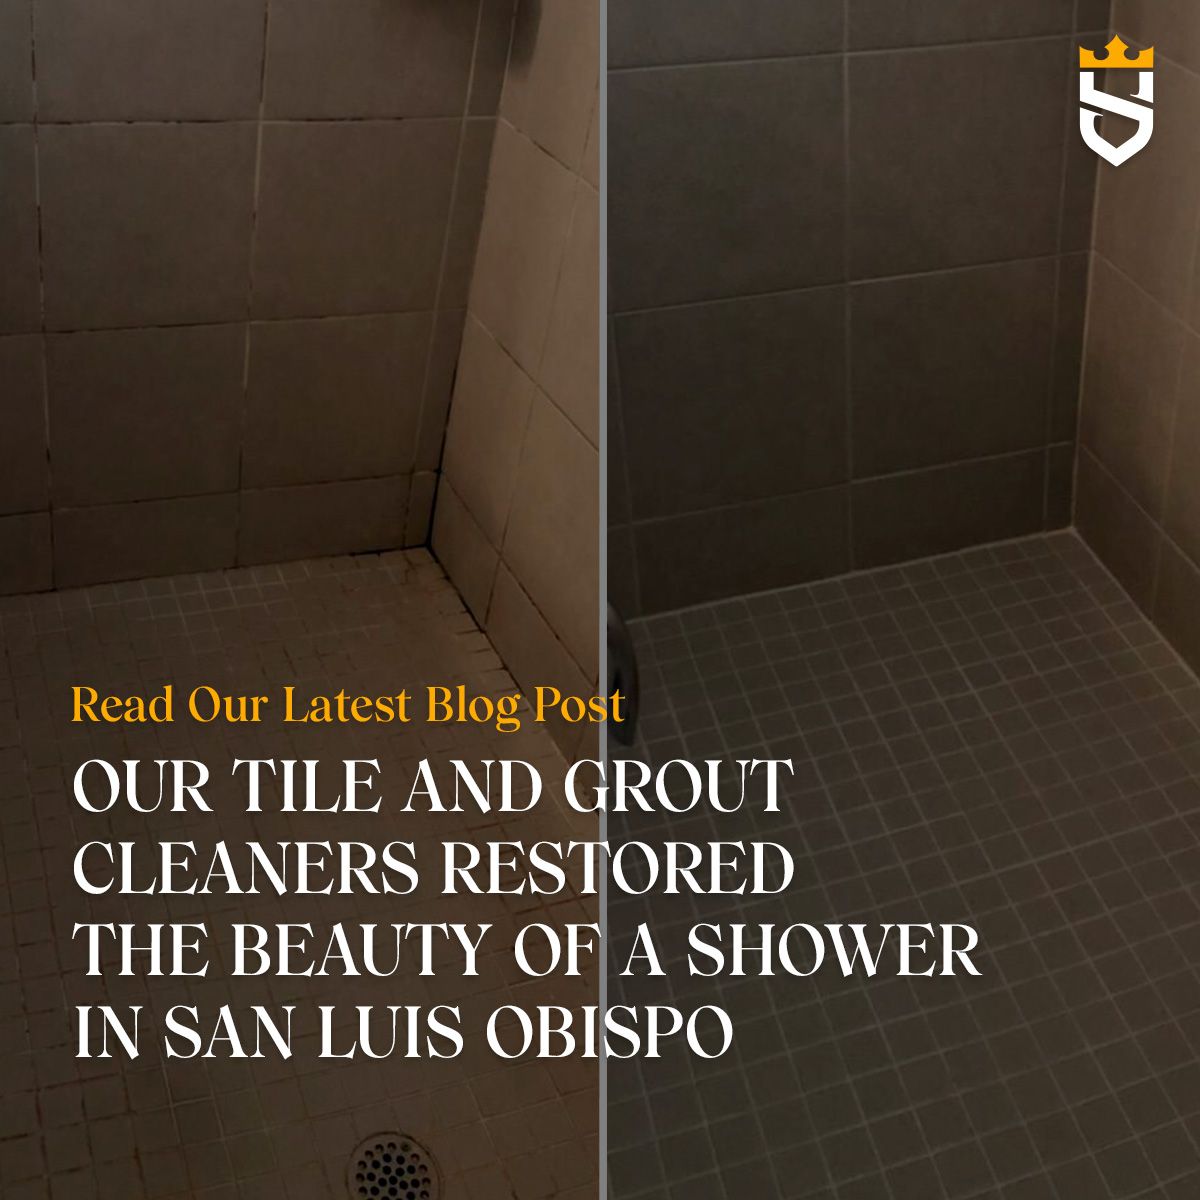 Our Tile And Grout Cleaners Restored the Beauty of a Shower in San Luis Obispo